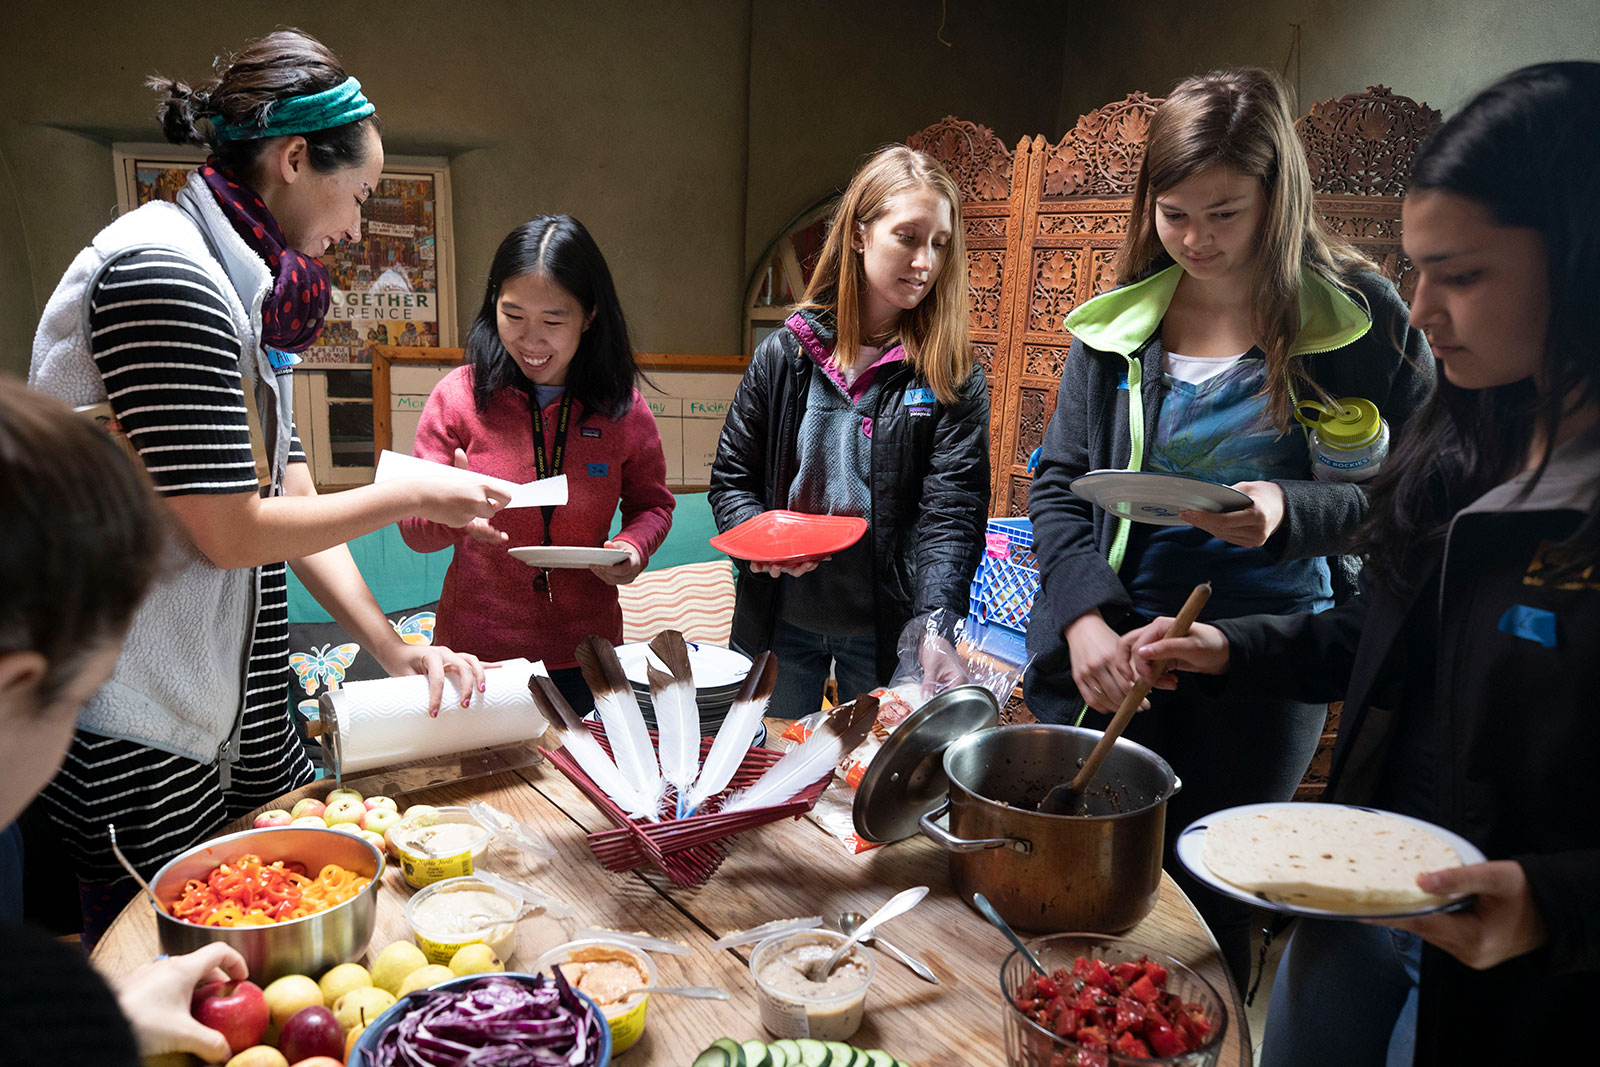 <strong>Ali Baird ’19</strong>, <strong>Jia Mei ’21</strong>, <strong>Kate Schroeder ’20</strong>, and <strong>Lauren Stierman ’22</strong> line up to get some of the locally grown food offered during their meals at TiLT.